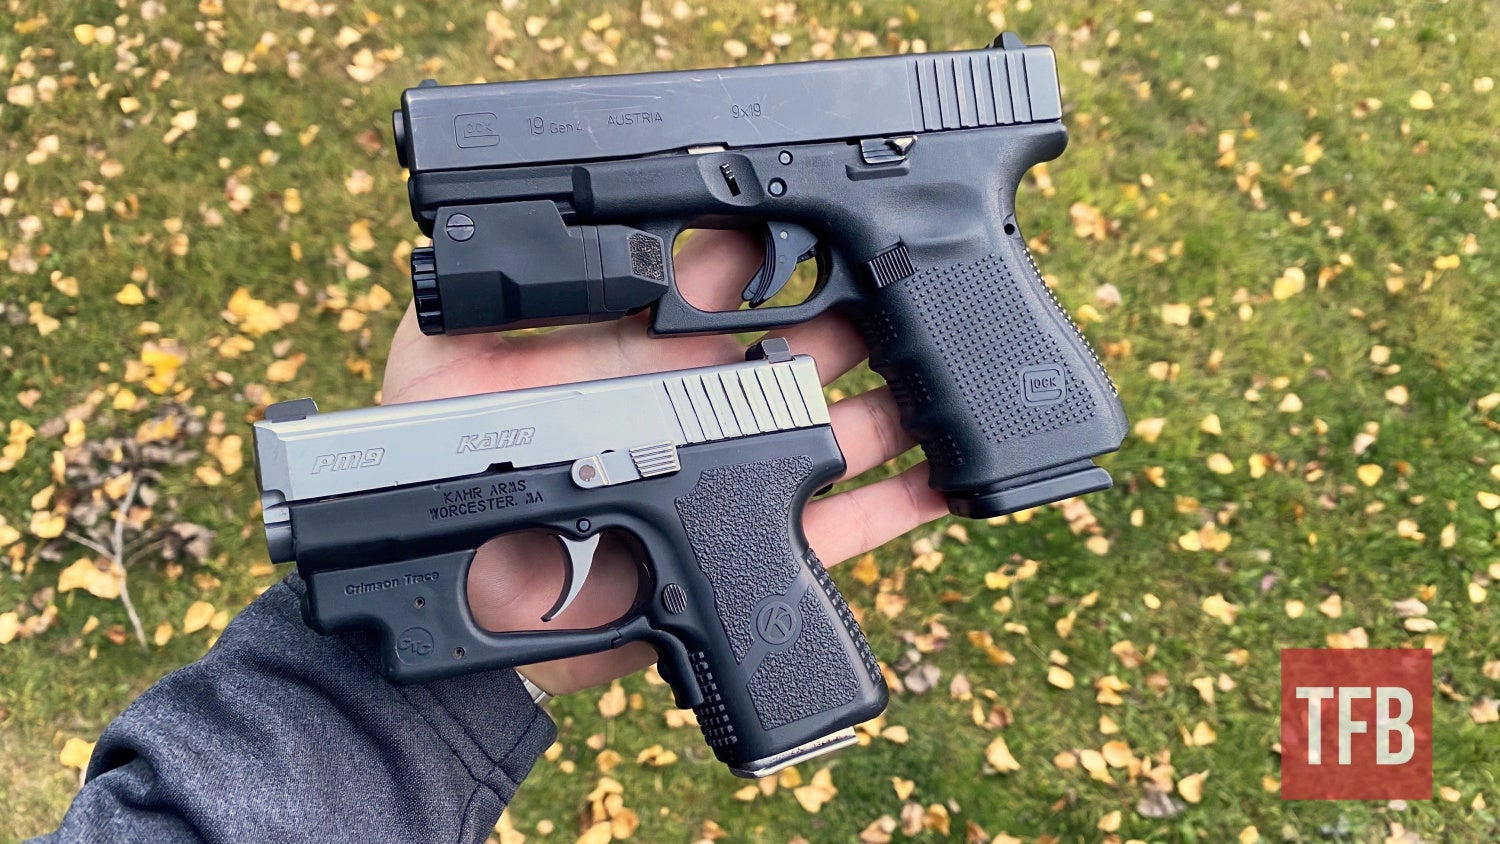 Concealed Carry Corner: Carrying and Training With Similar Firearms